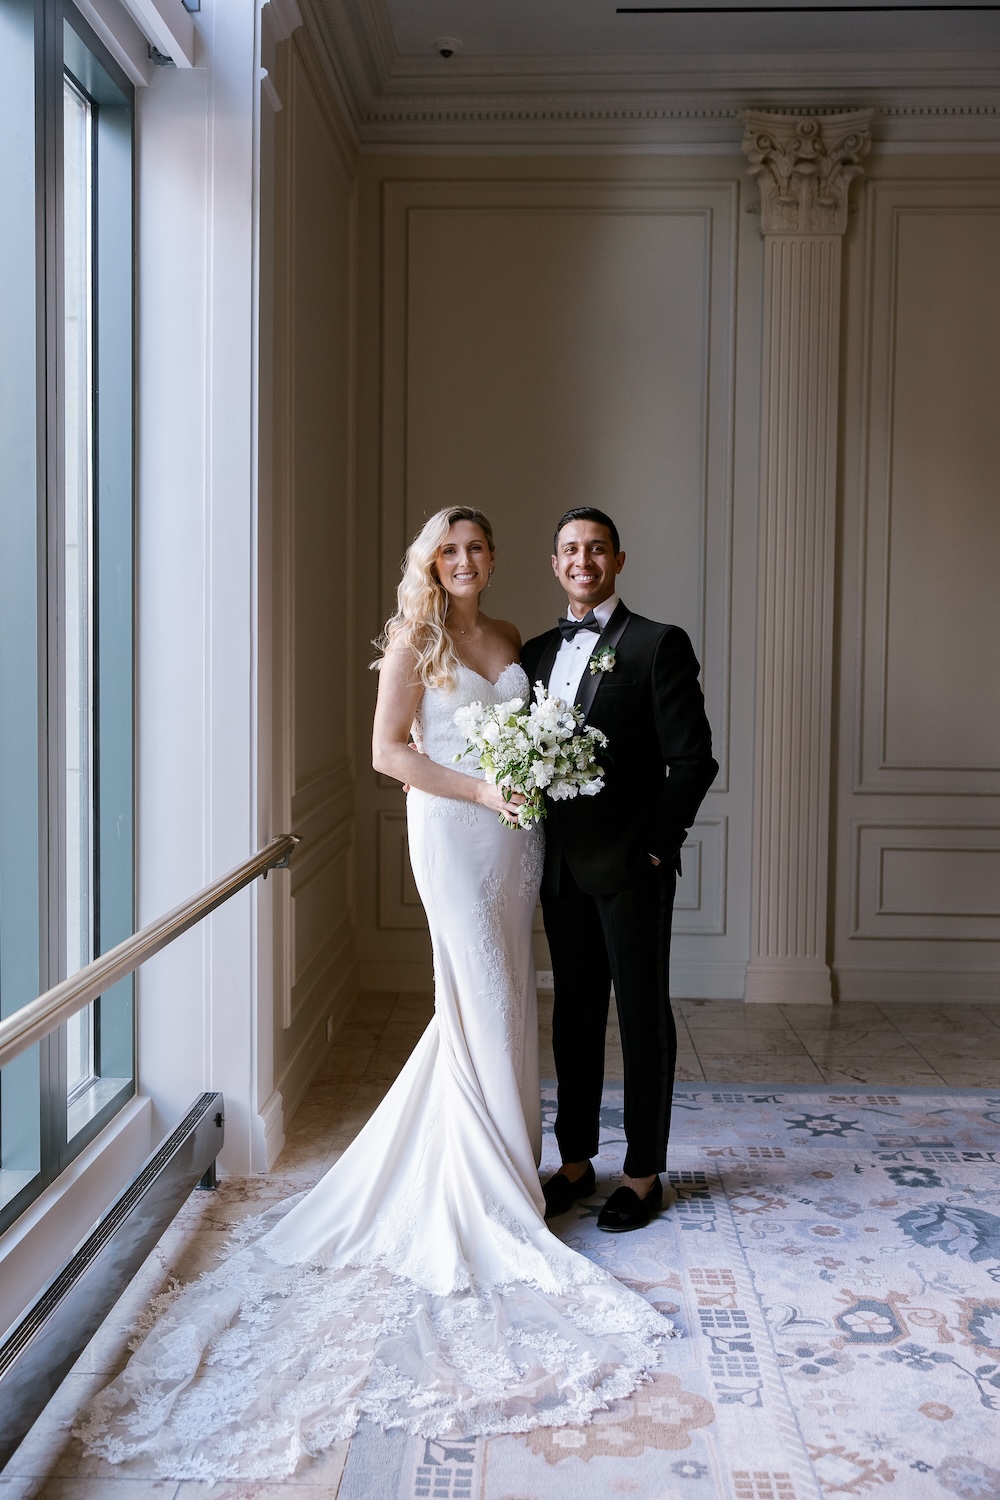 Formal portrait of bride and groom in front of large window. Modern Washington DC wedding at National Museum of Women in the Arts. Sarah Bradshaw Photography.